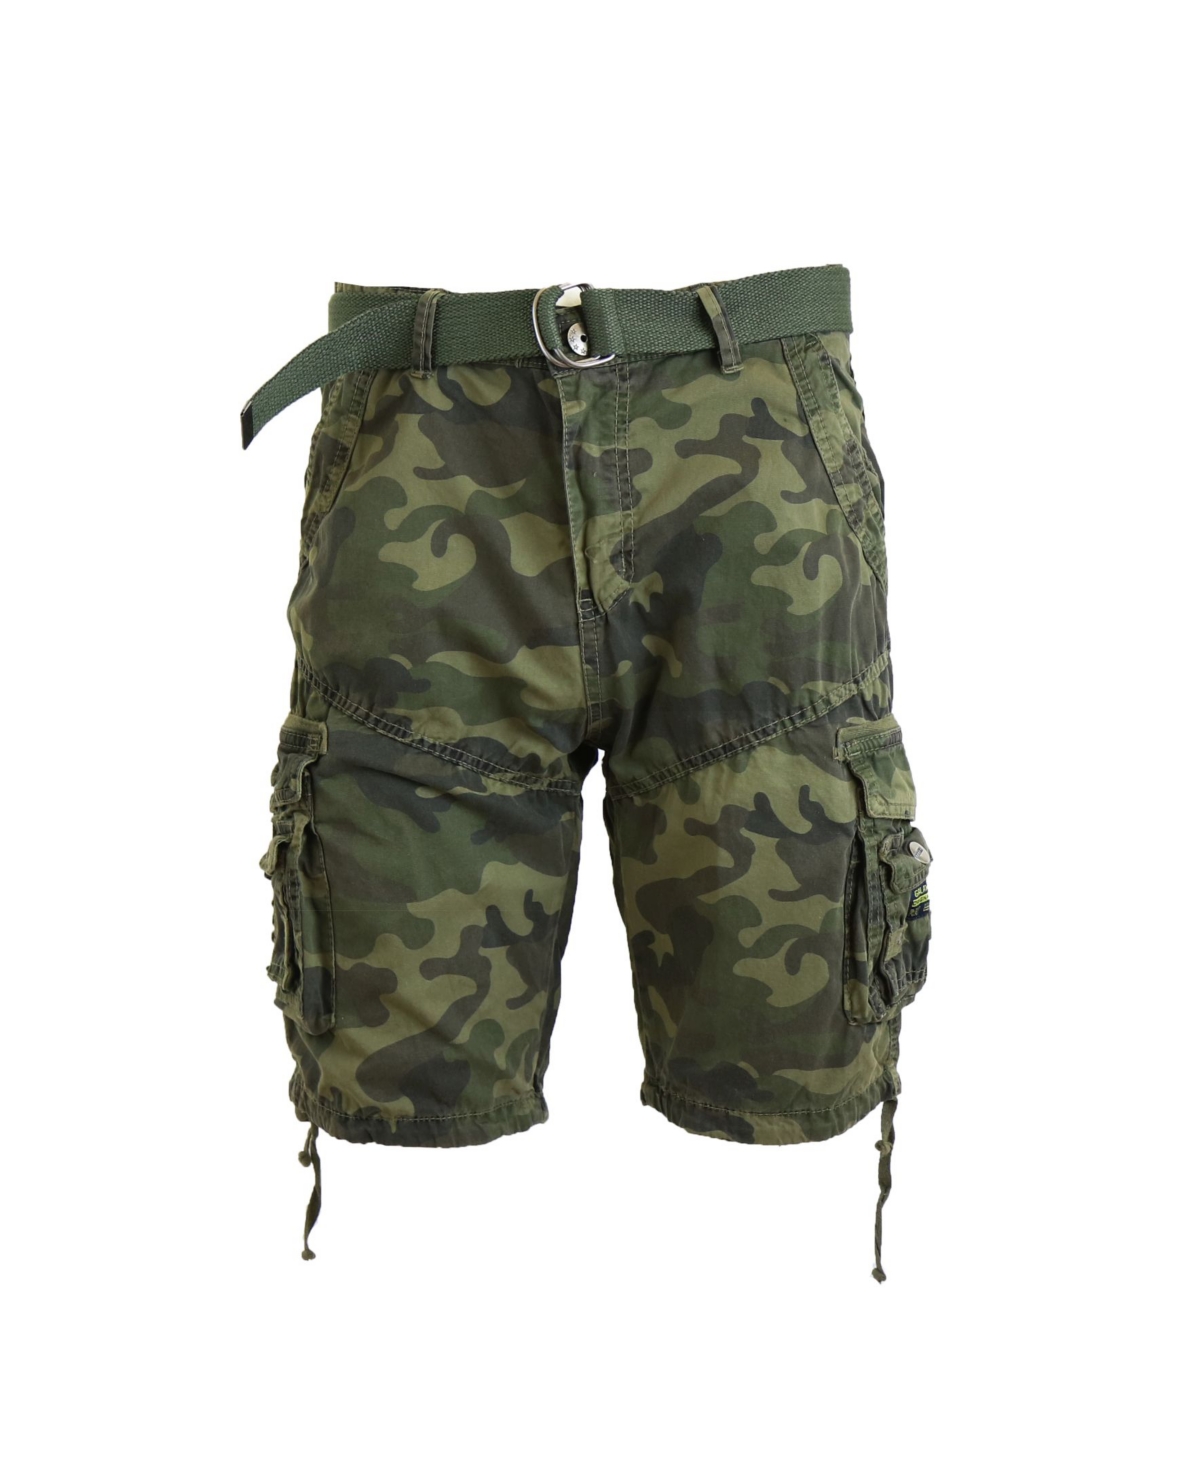 Men's Belted Cargo Shorts with Twill Flat Front Washed Utility Pockets - Woodland